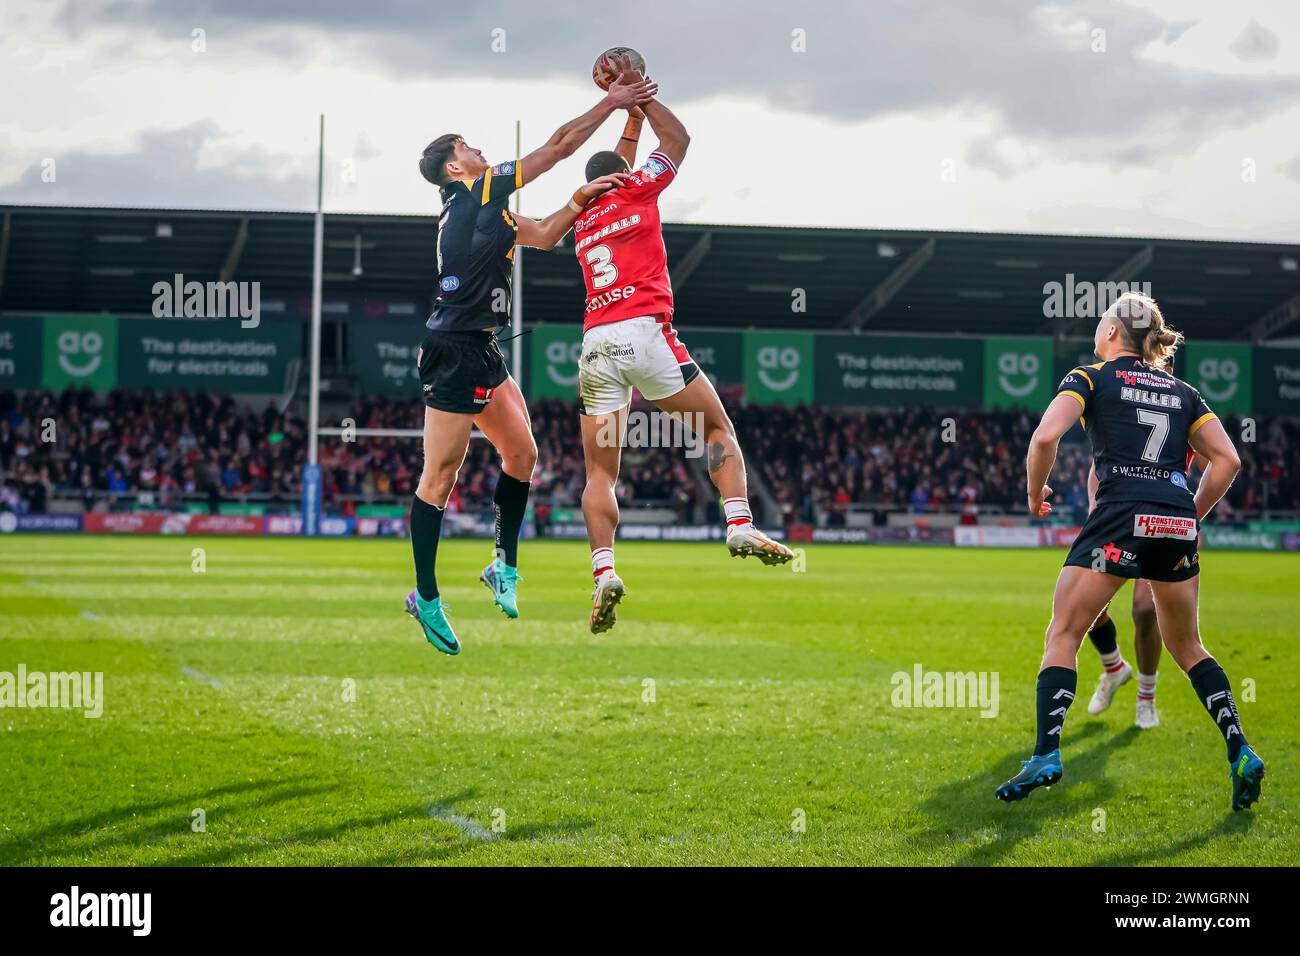 NENE MACDONALD challenging for a high ball. Salford Red Devils Vs Castleford Tigers Betfred Super League Round 2, Salford Community Stadium, 25th February 2024. Credit: James Giblin/Alamy Live News. Stock Photo